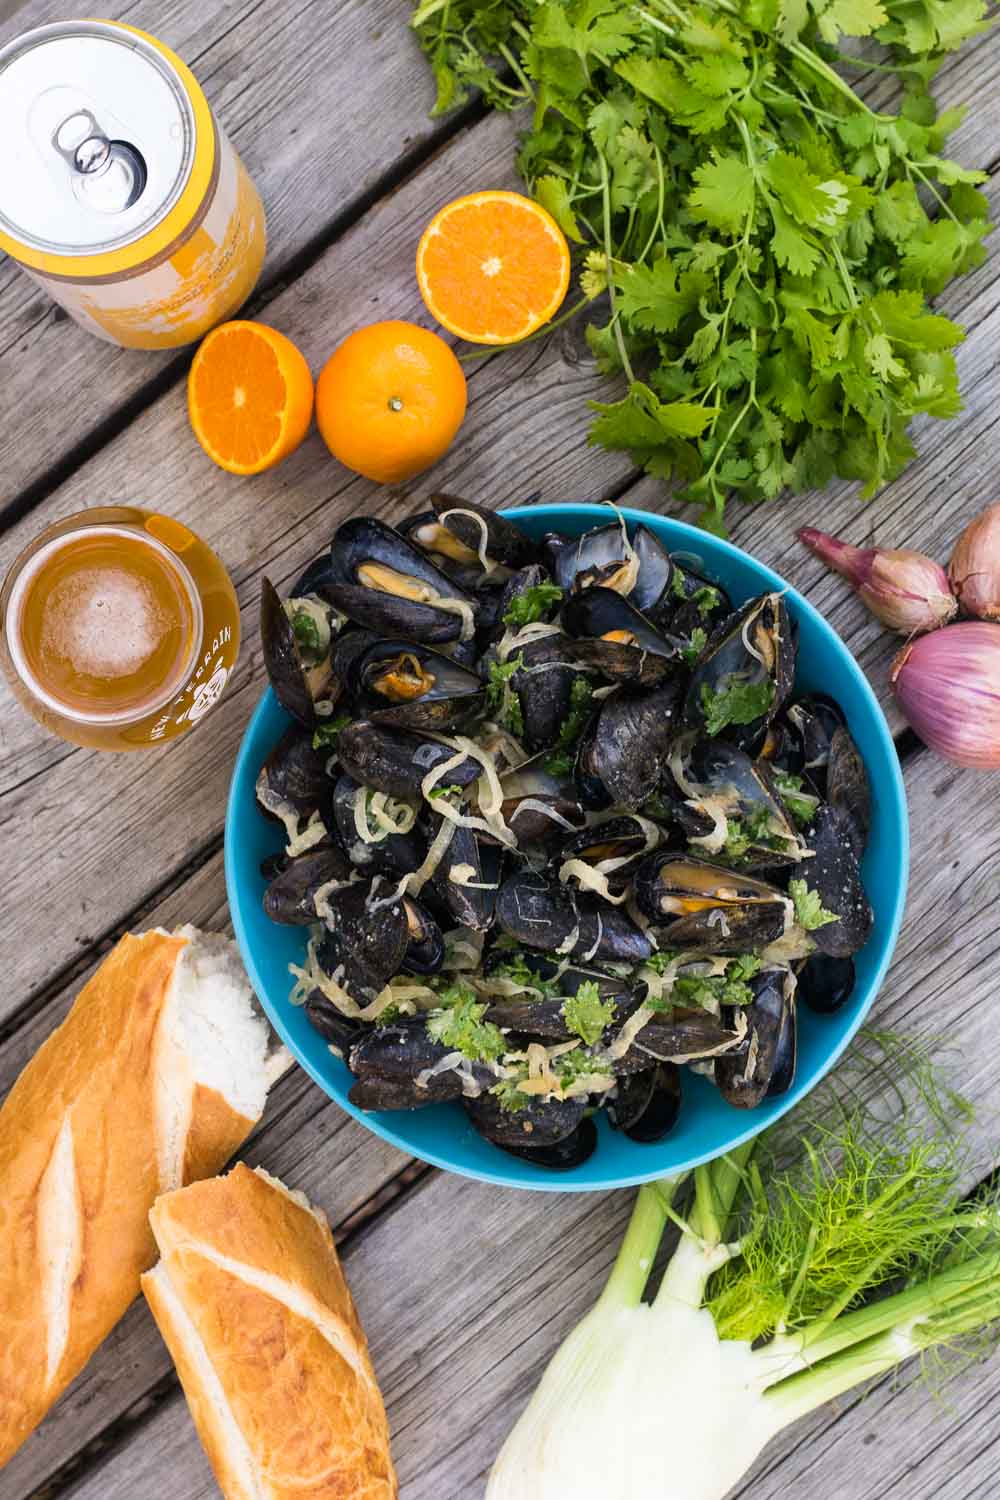 Celebrating Great American Beer Festival with craft beer recipes from Golden, Colorado! New Terrain's Suntrip makes the perfect broth for mussels, fennel, & shallots.